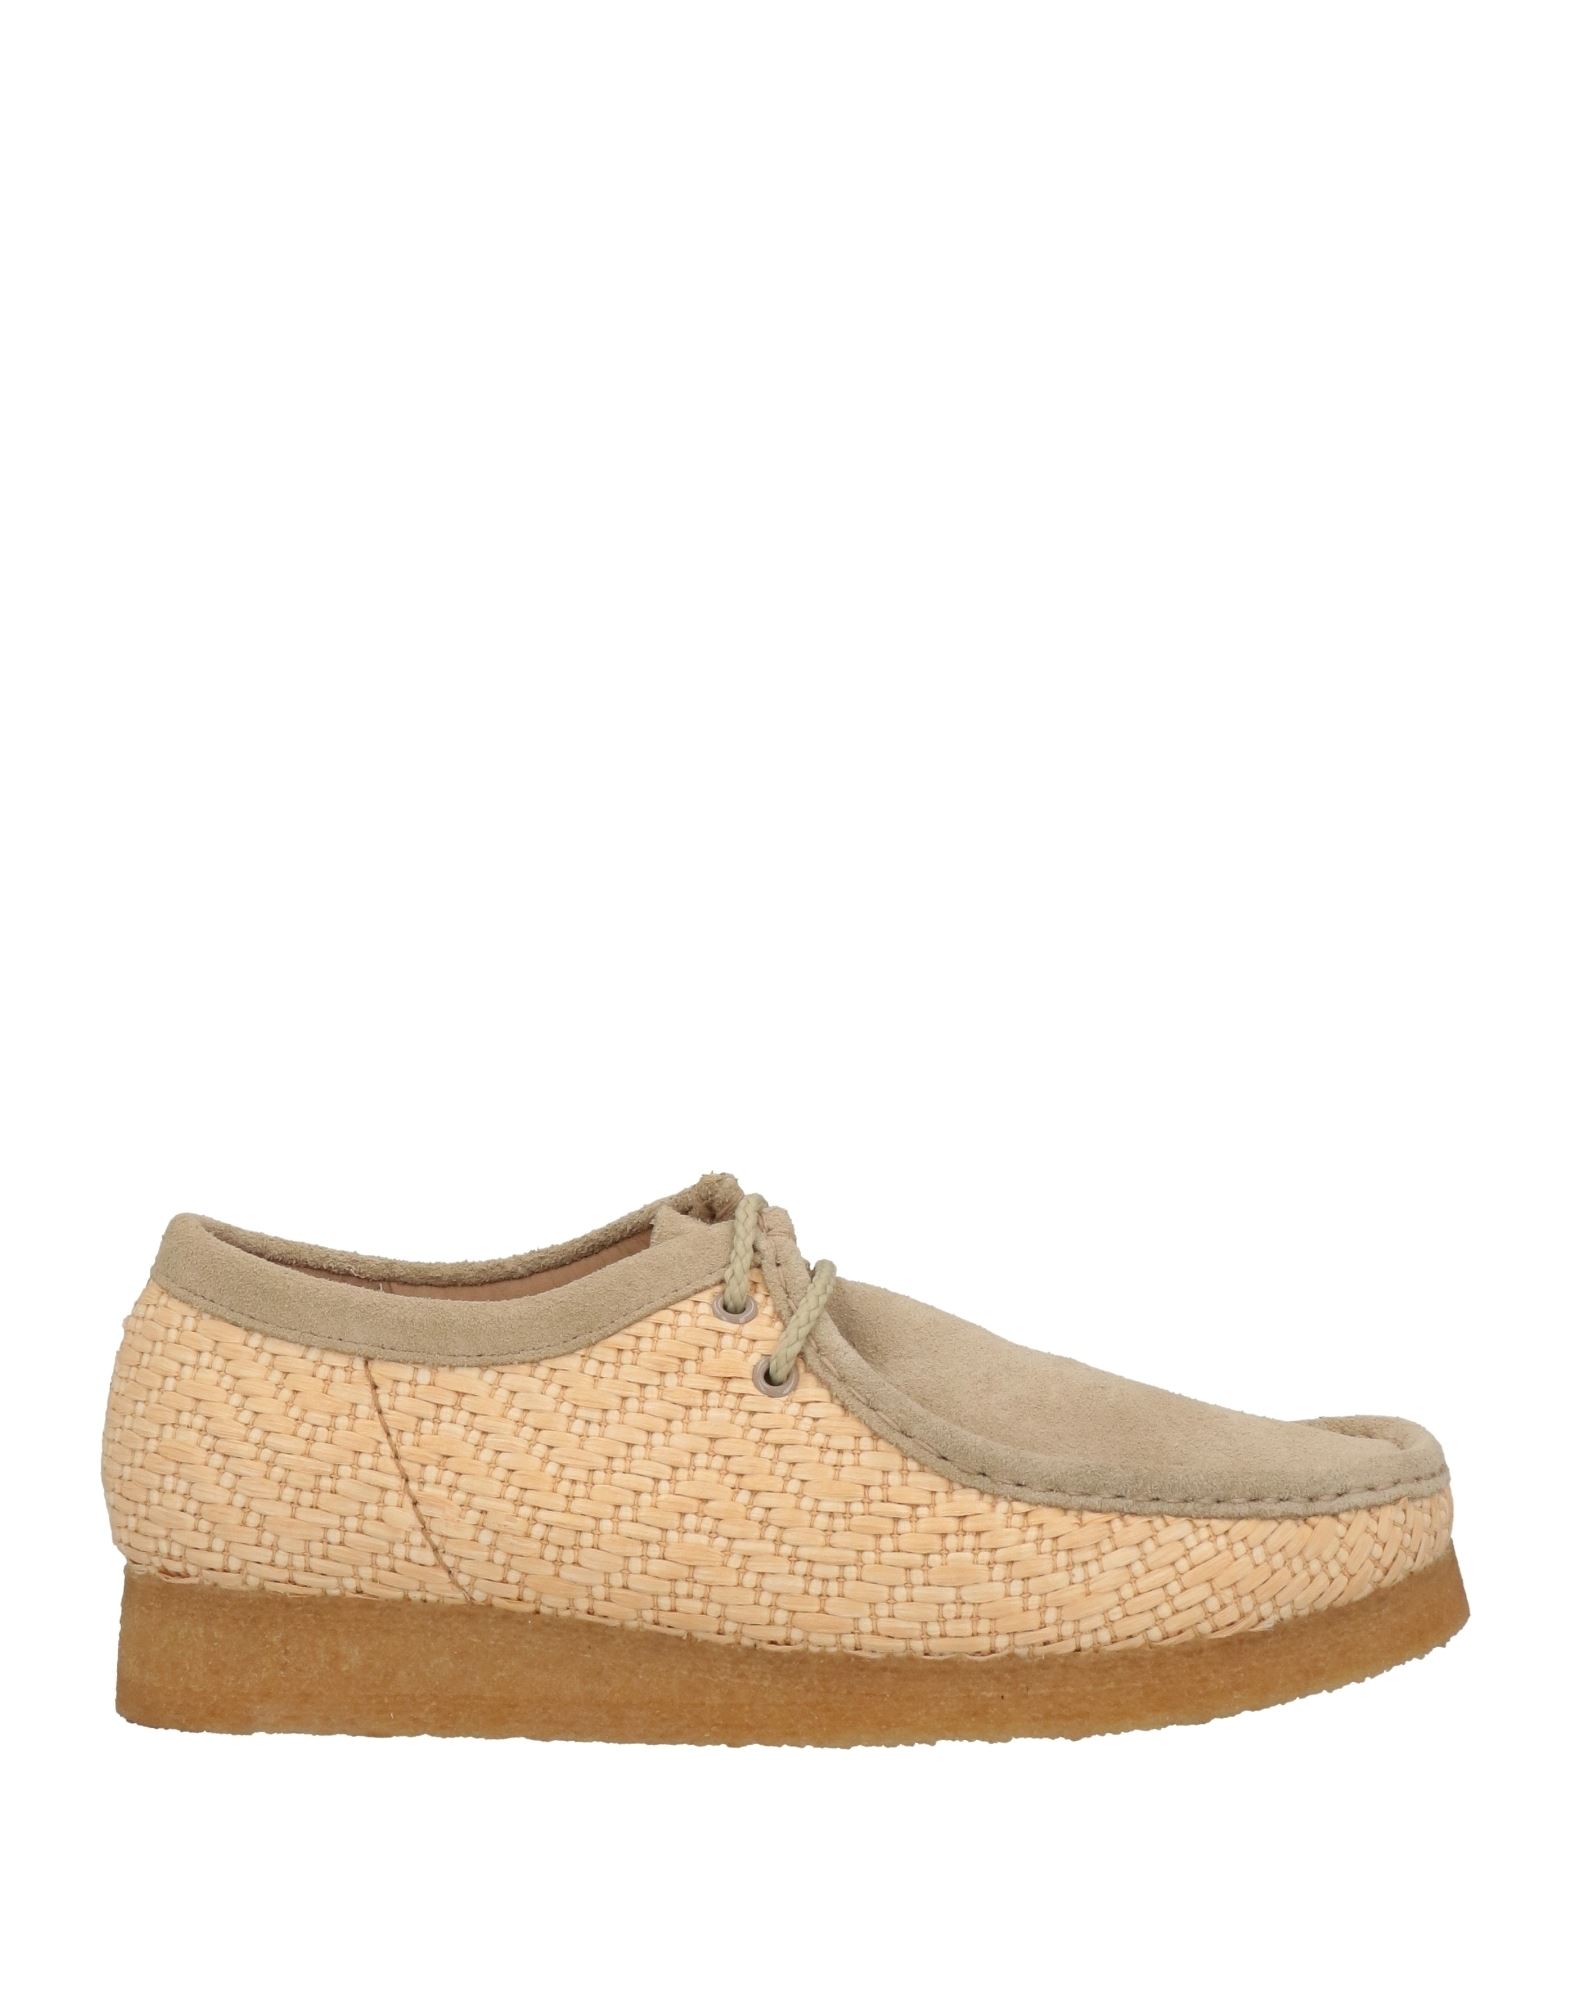 Clarks Originals Lace-up Shoes In Sage Green